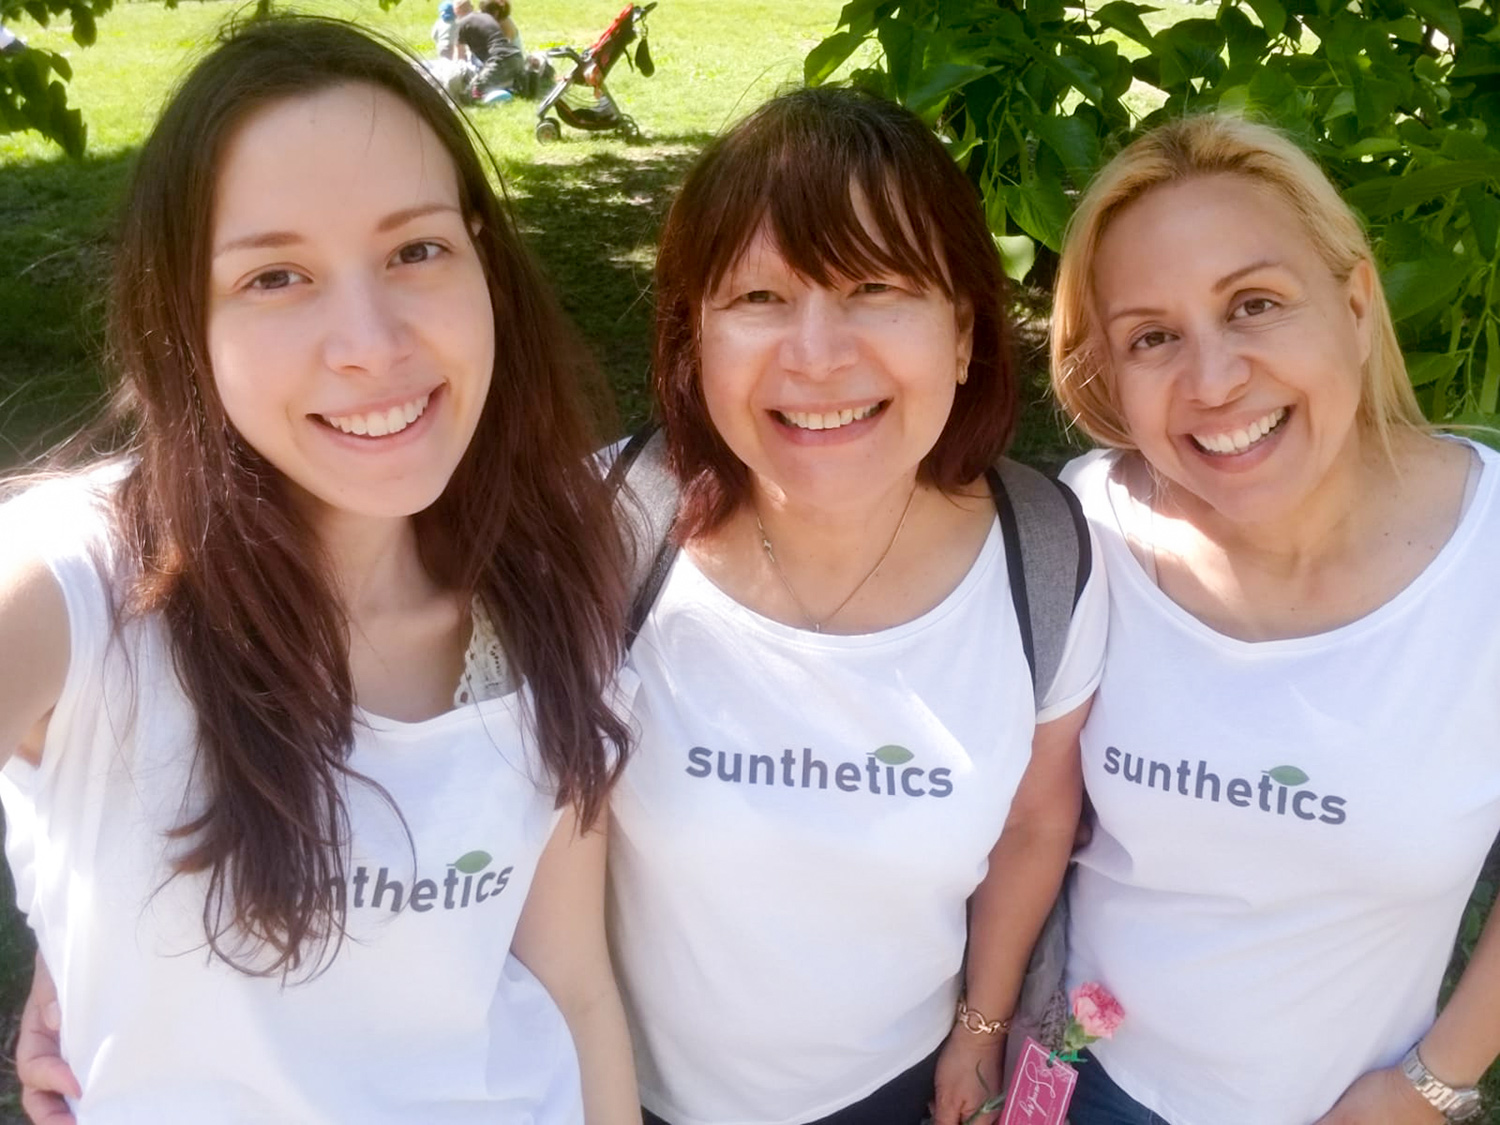 Daniela Blanco and two women take a selfie, all wearing Sunthetics company t-shirts. The logo on the t-shirt is the word “Sunthetics” in modern brown-gray font, with a green stylized leaf over the “i” of “Sunthetics.”